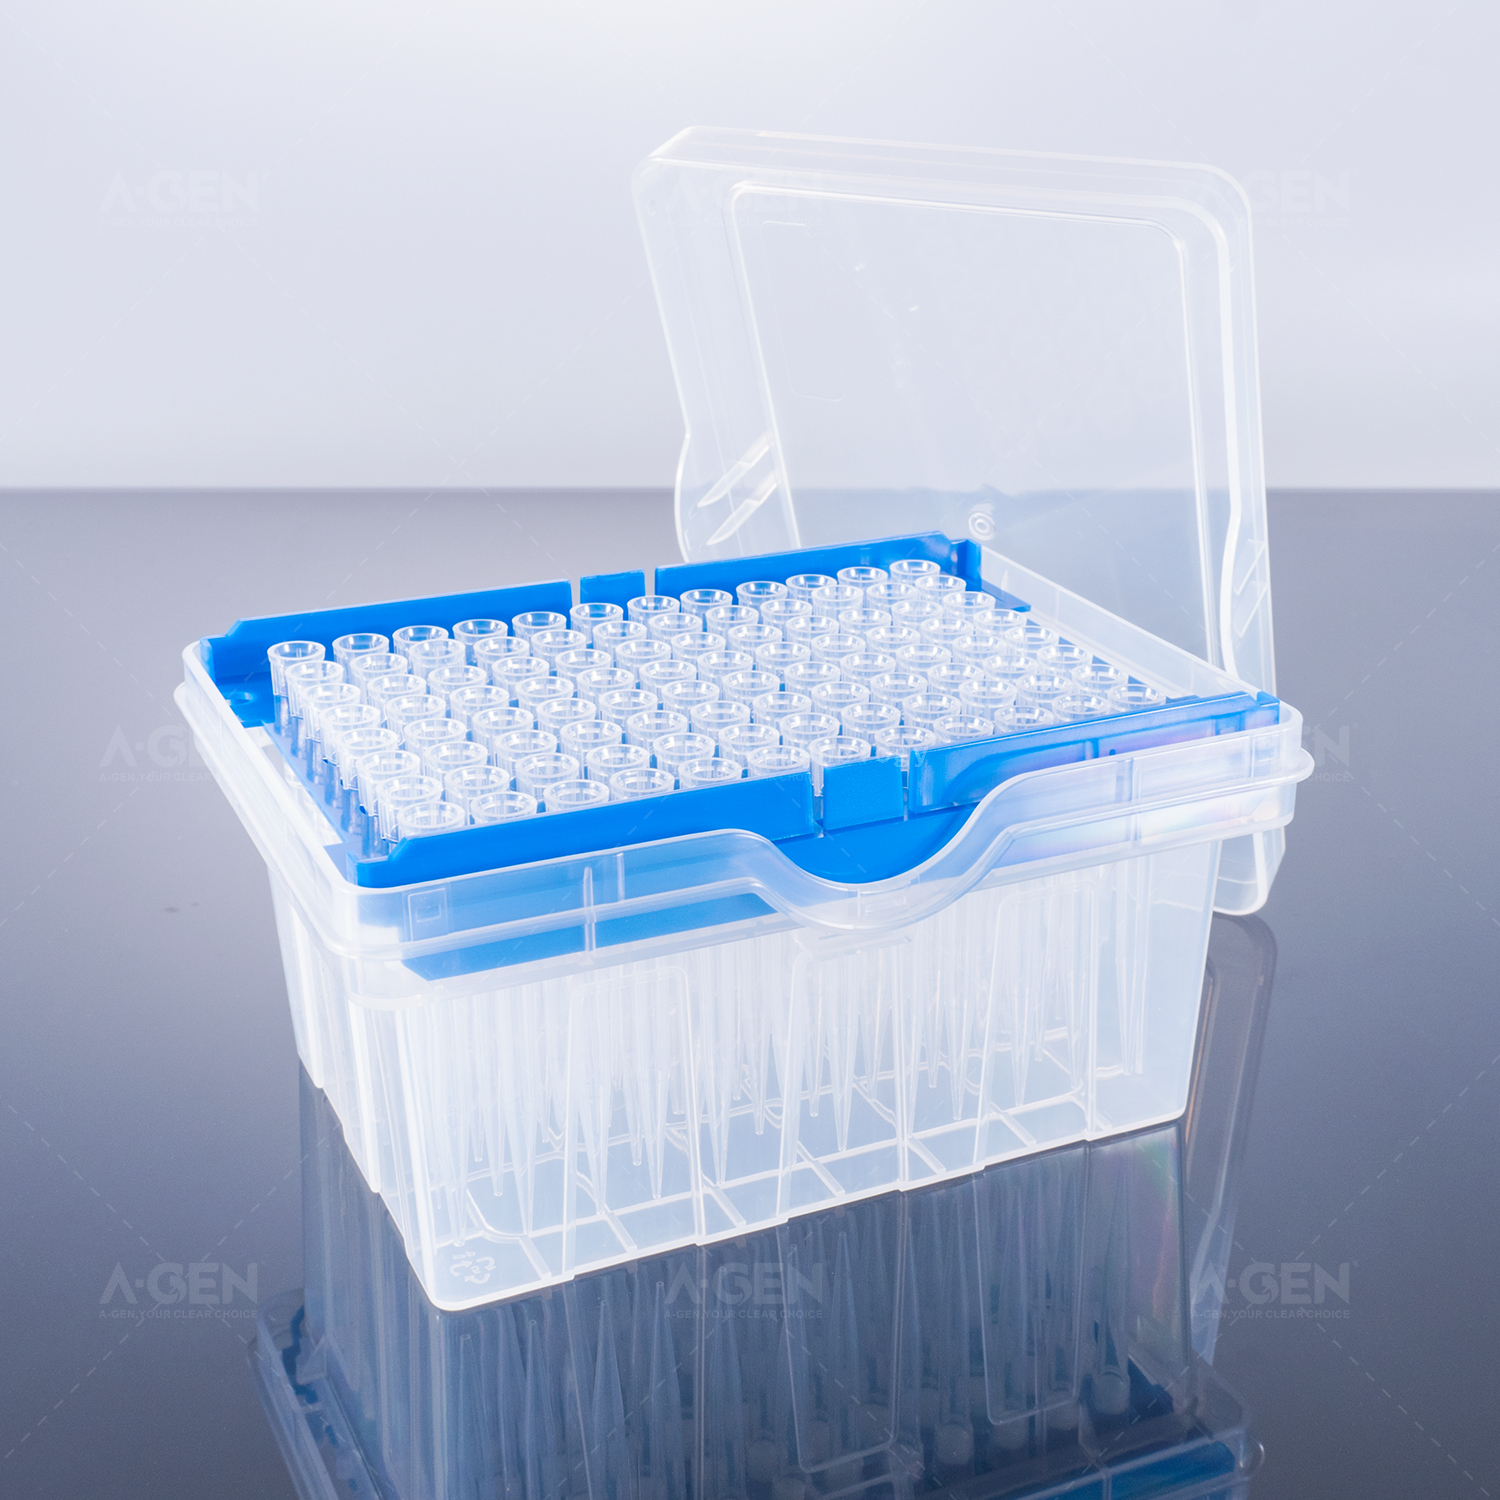 Tecan LiHa 200μL Transparent PP Pipette Tip (Racked,sterilized) for Liquid Transfer with Filter TTF-200-RSL Low Retention